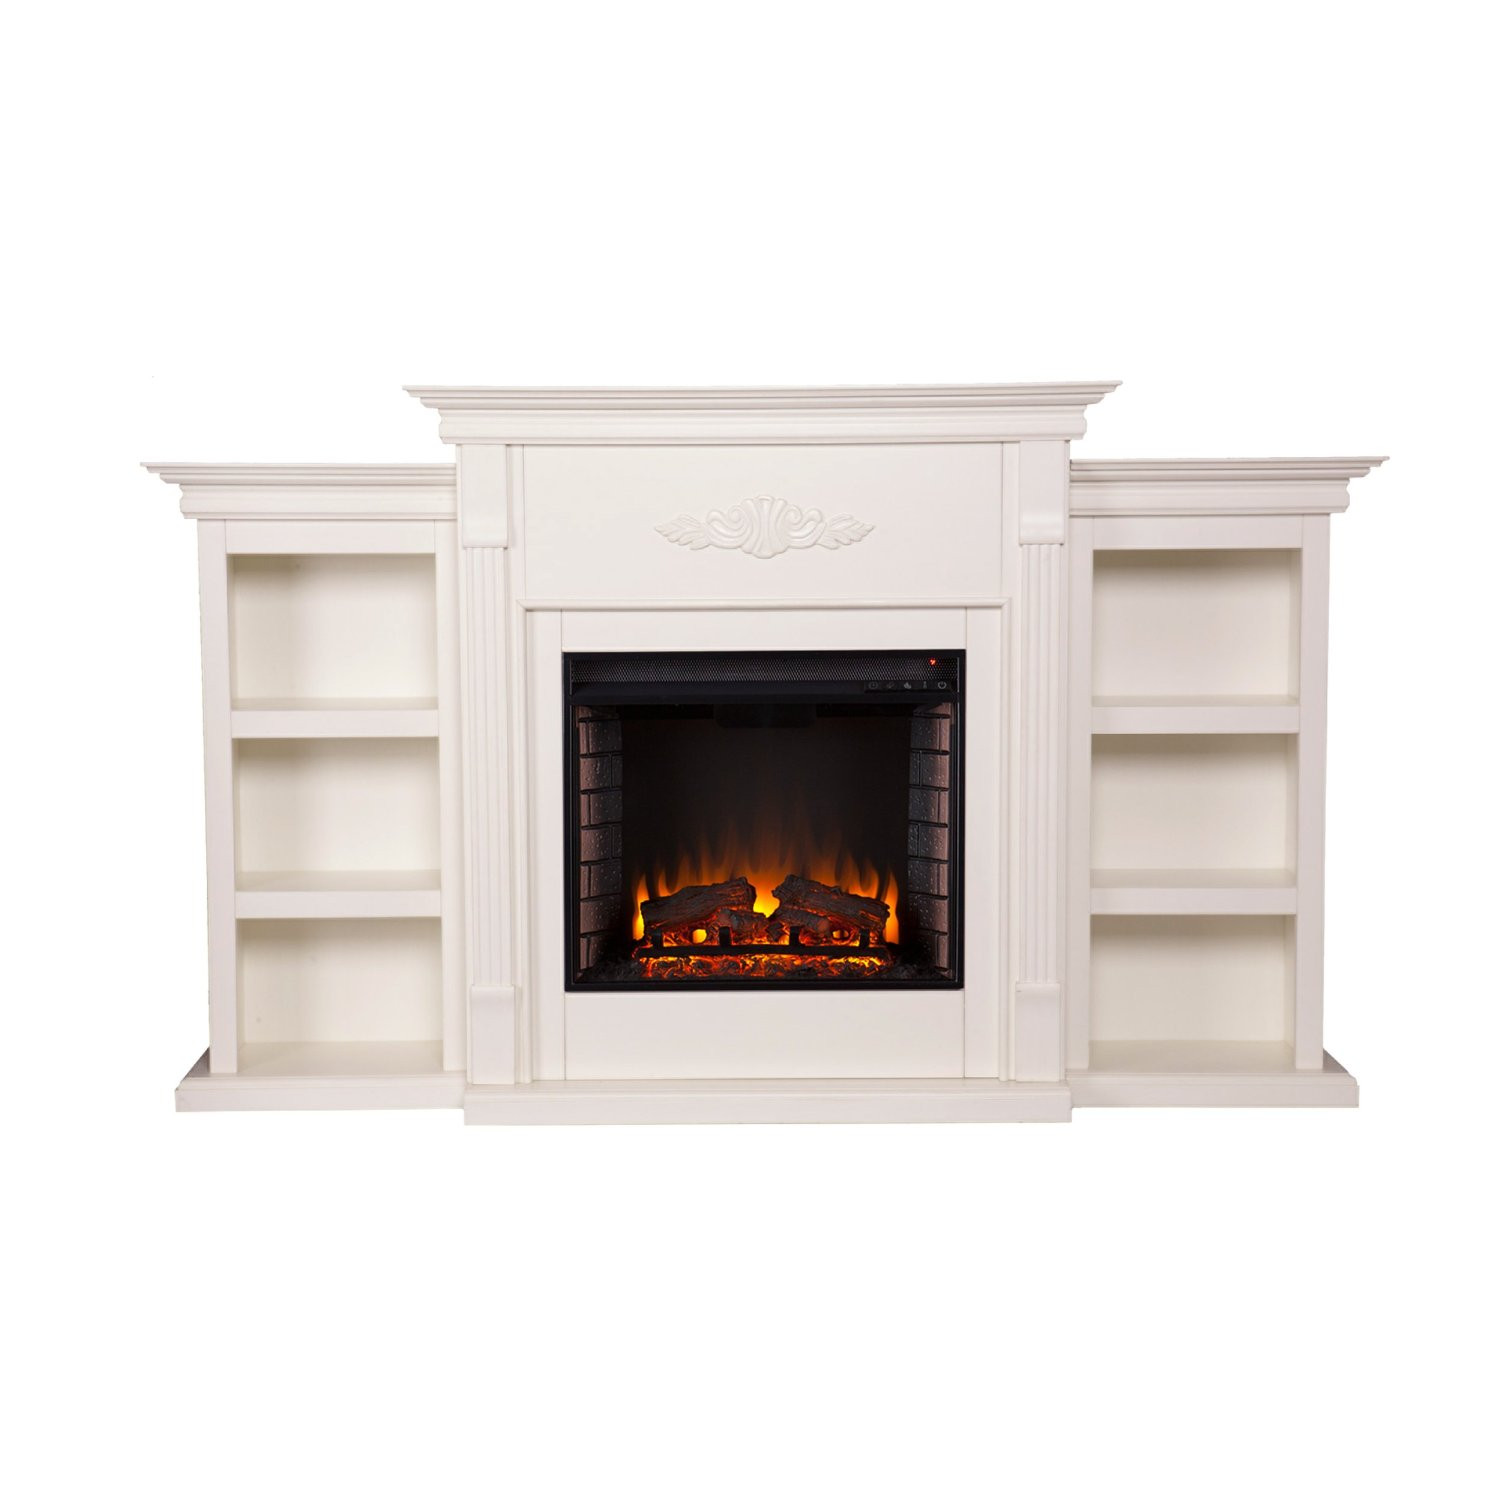 Electric Fireplace With Bookcase
 Best Freestanding White Electric Fireplace Review In 2017